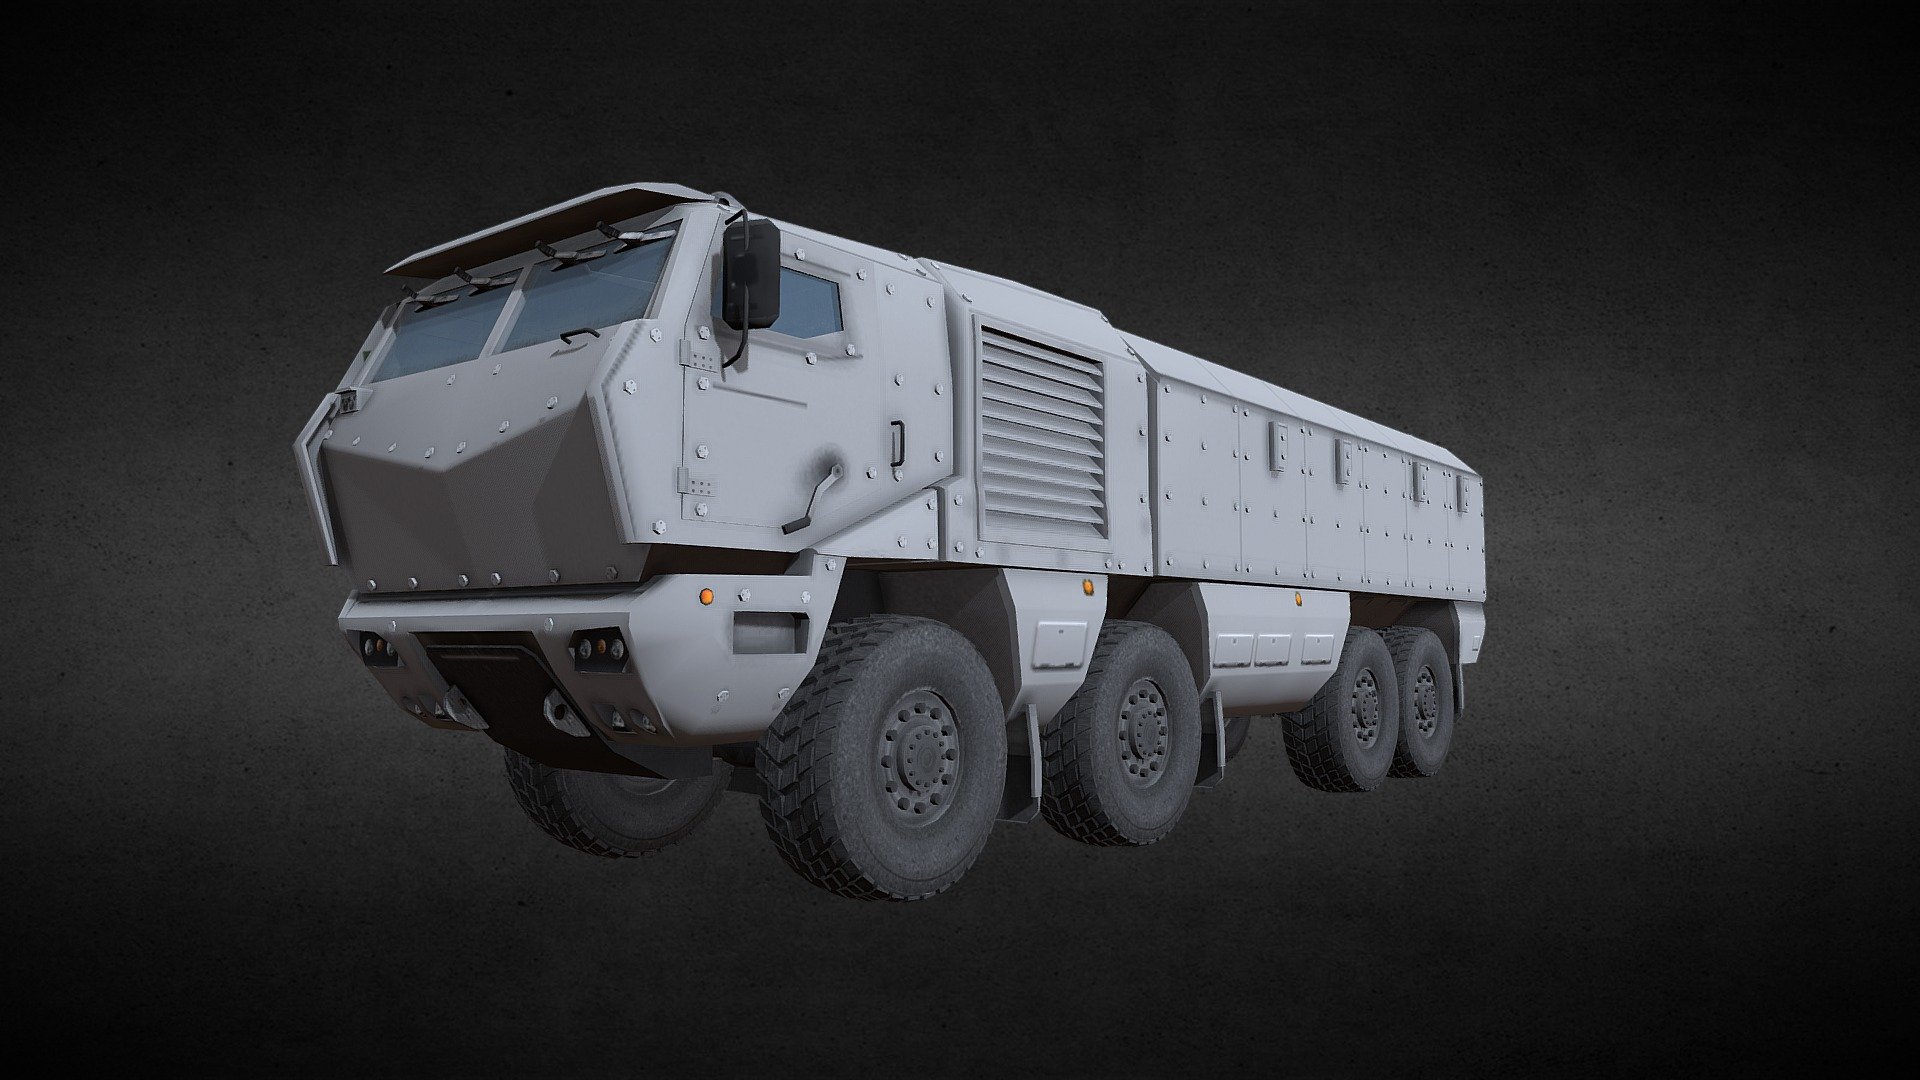 Reservations made in accordance with NATO classification STANAG 4569 of level 3b, in which the vehicle can withstand undermining by high-explosive devices weighing 8 kg of TNT under any car seat, as the Russian machine of this kind are made public for the first time and generally accepted standards for the classification of explosions absent. Bulletproof protection corresponds to the fourth level. Combined set of ceramics and steel armor, which protects against armor-piercing bullets of caliber 14,5 × 114 mm. Includes 128,5-129,0 mm thick bulletproof glass with a transparency of 70%, developed by the &ldquo;Magistral Ltd